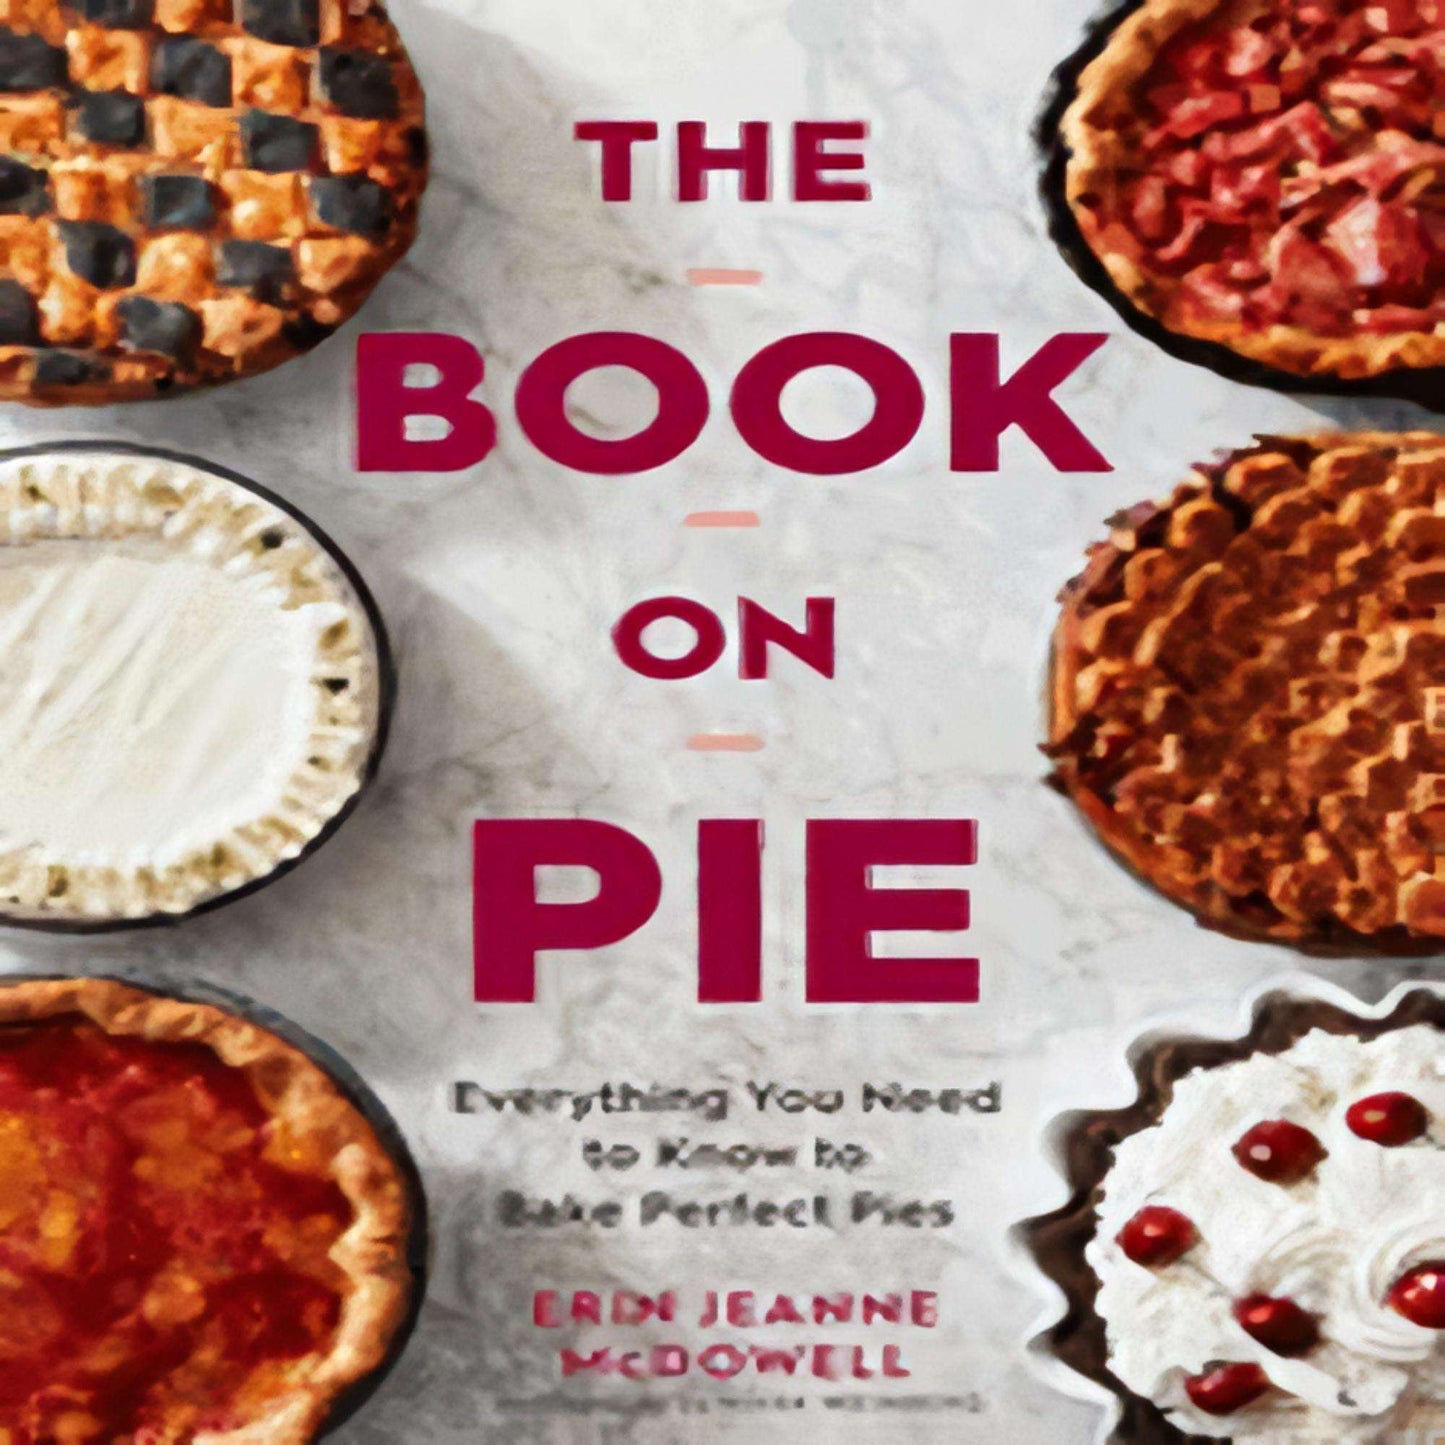 TEXTBOOK The Book on Pie: Everything You Need to Know to Bake Perfect Pies126-022223-0358229286DPGBOOKSTORE.COM. Today's Bestsellers.